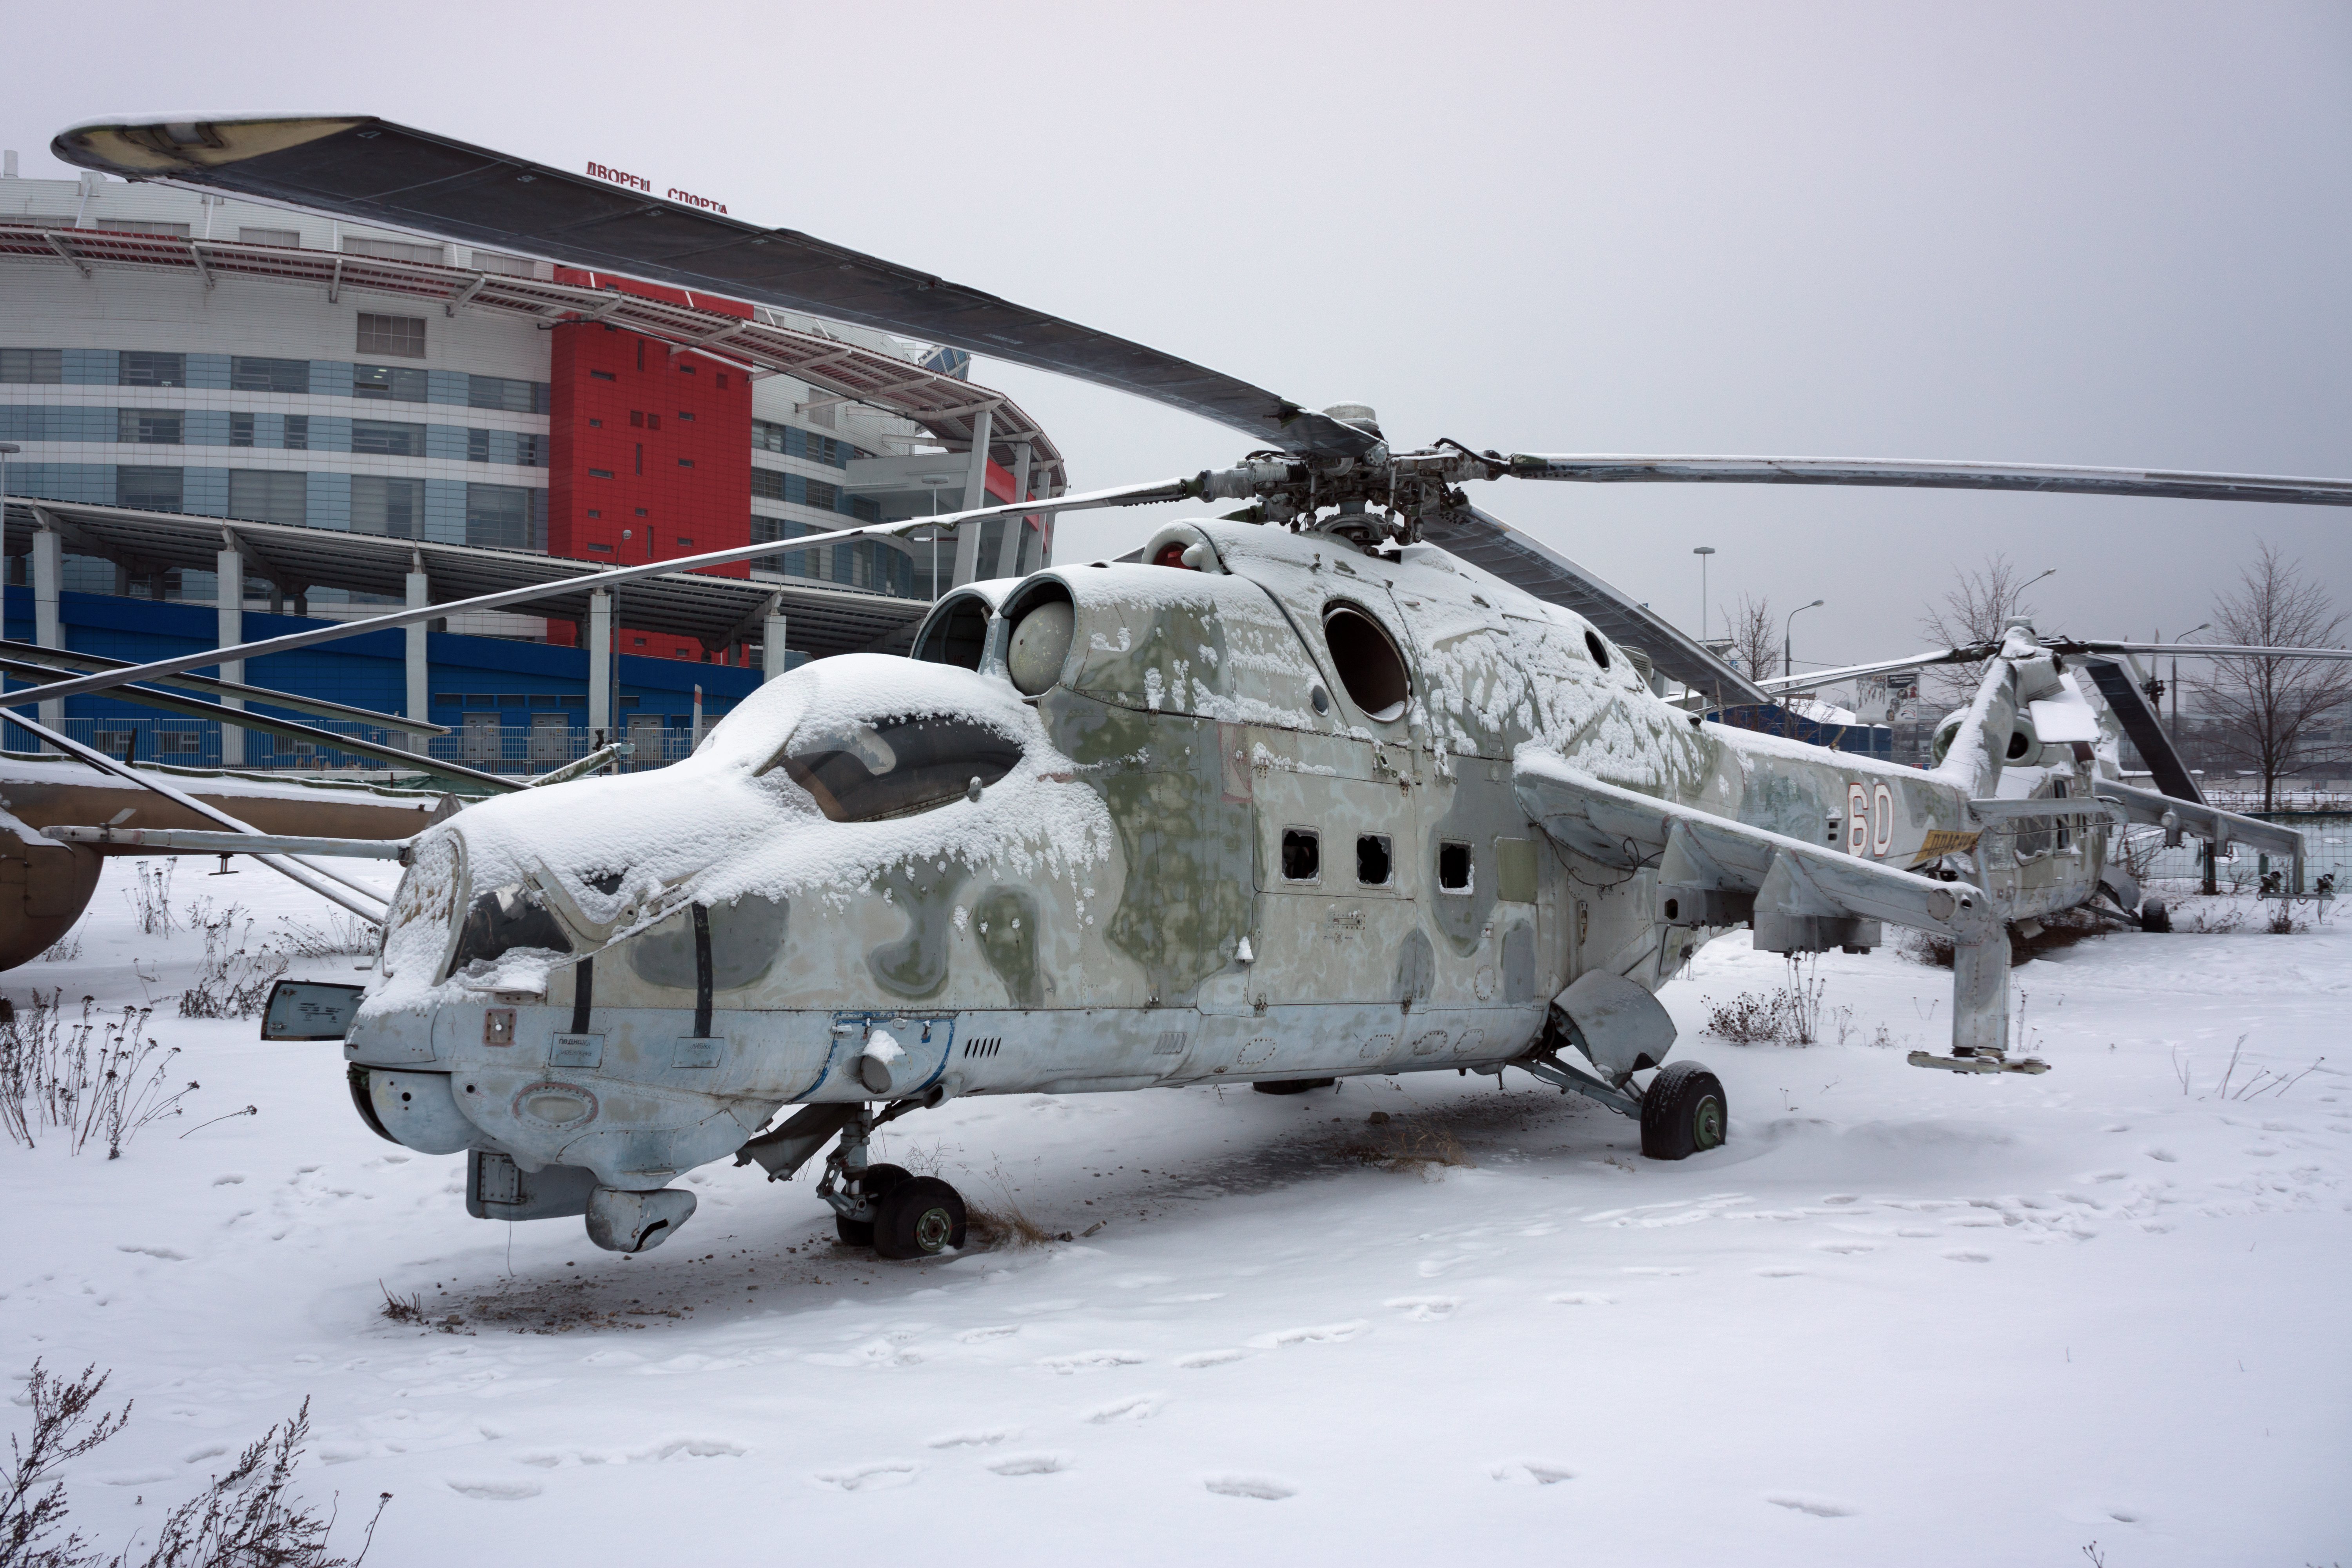 mi 24, Hind, Gunship, Russian, Russia, Military, Weapon, Helicopter, Aircraft,  64 Wallpaper